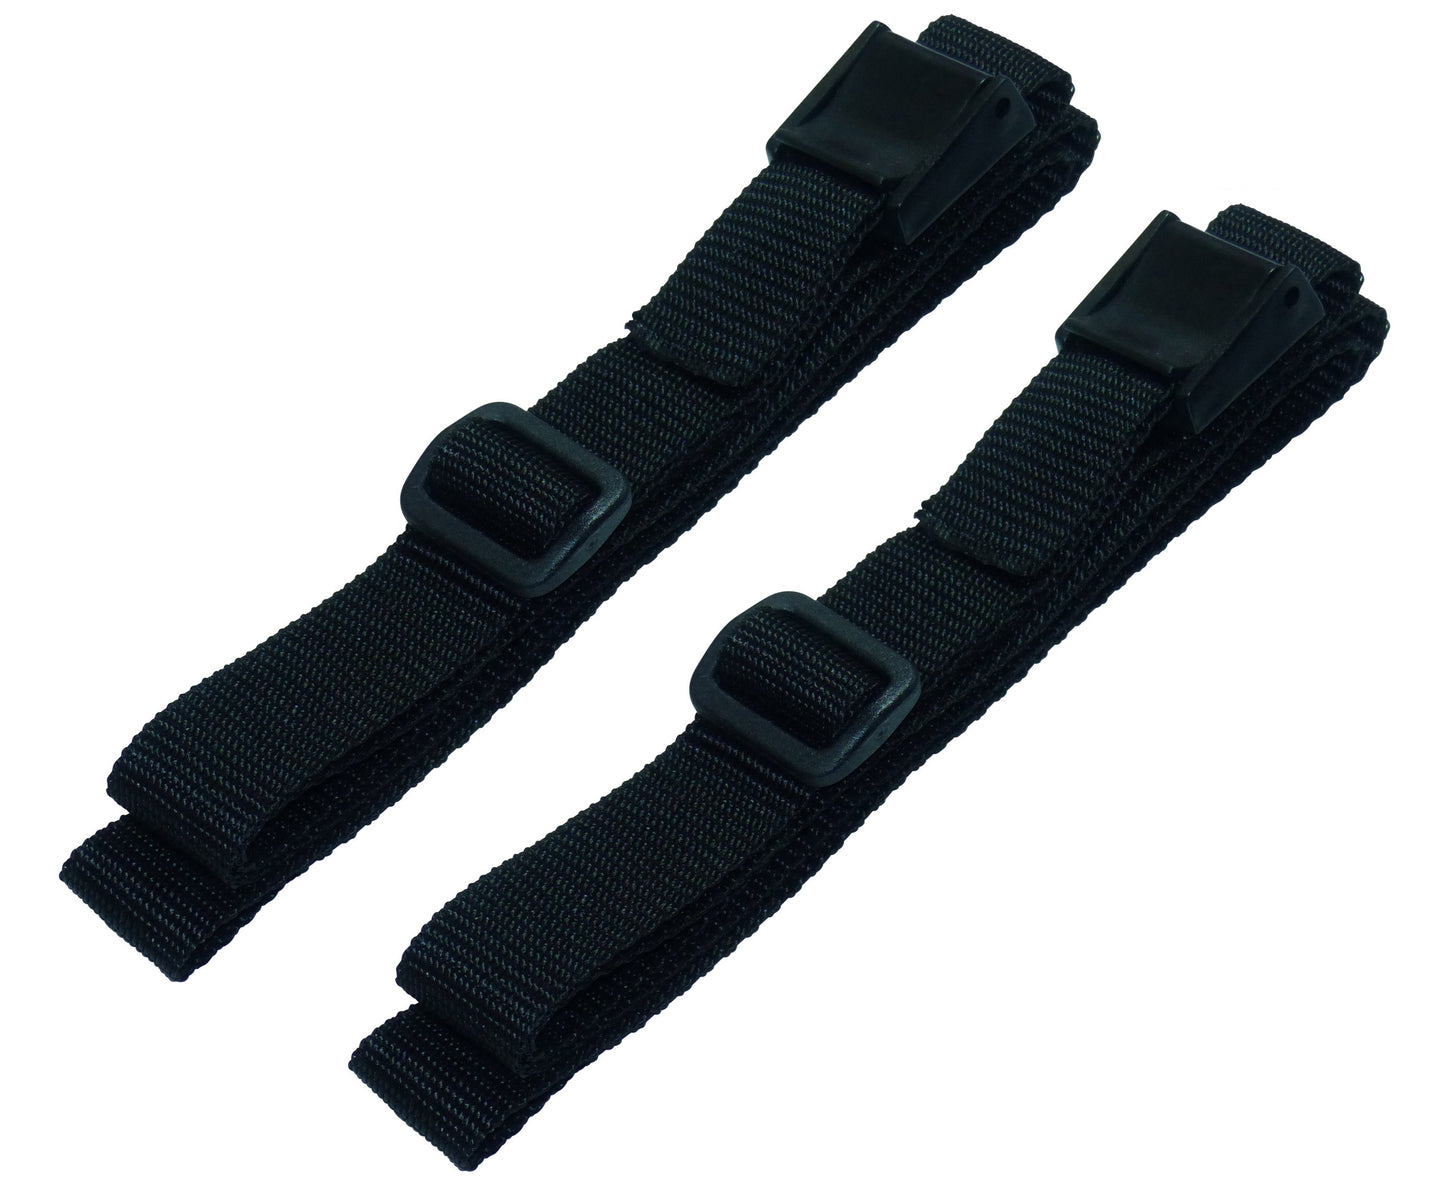 25mm Rivetted Strap with Plastic Cam Buckle & Triglide Buckles (Pair) in black